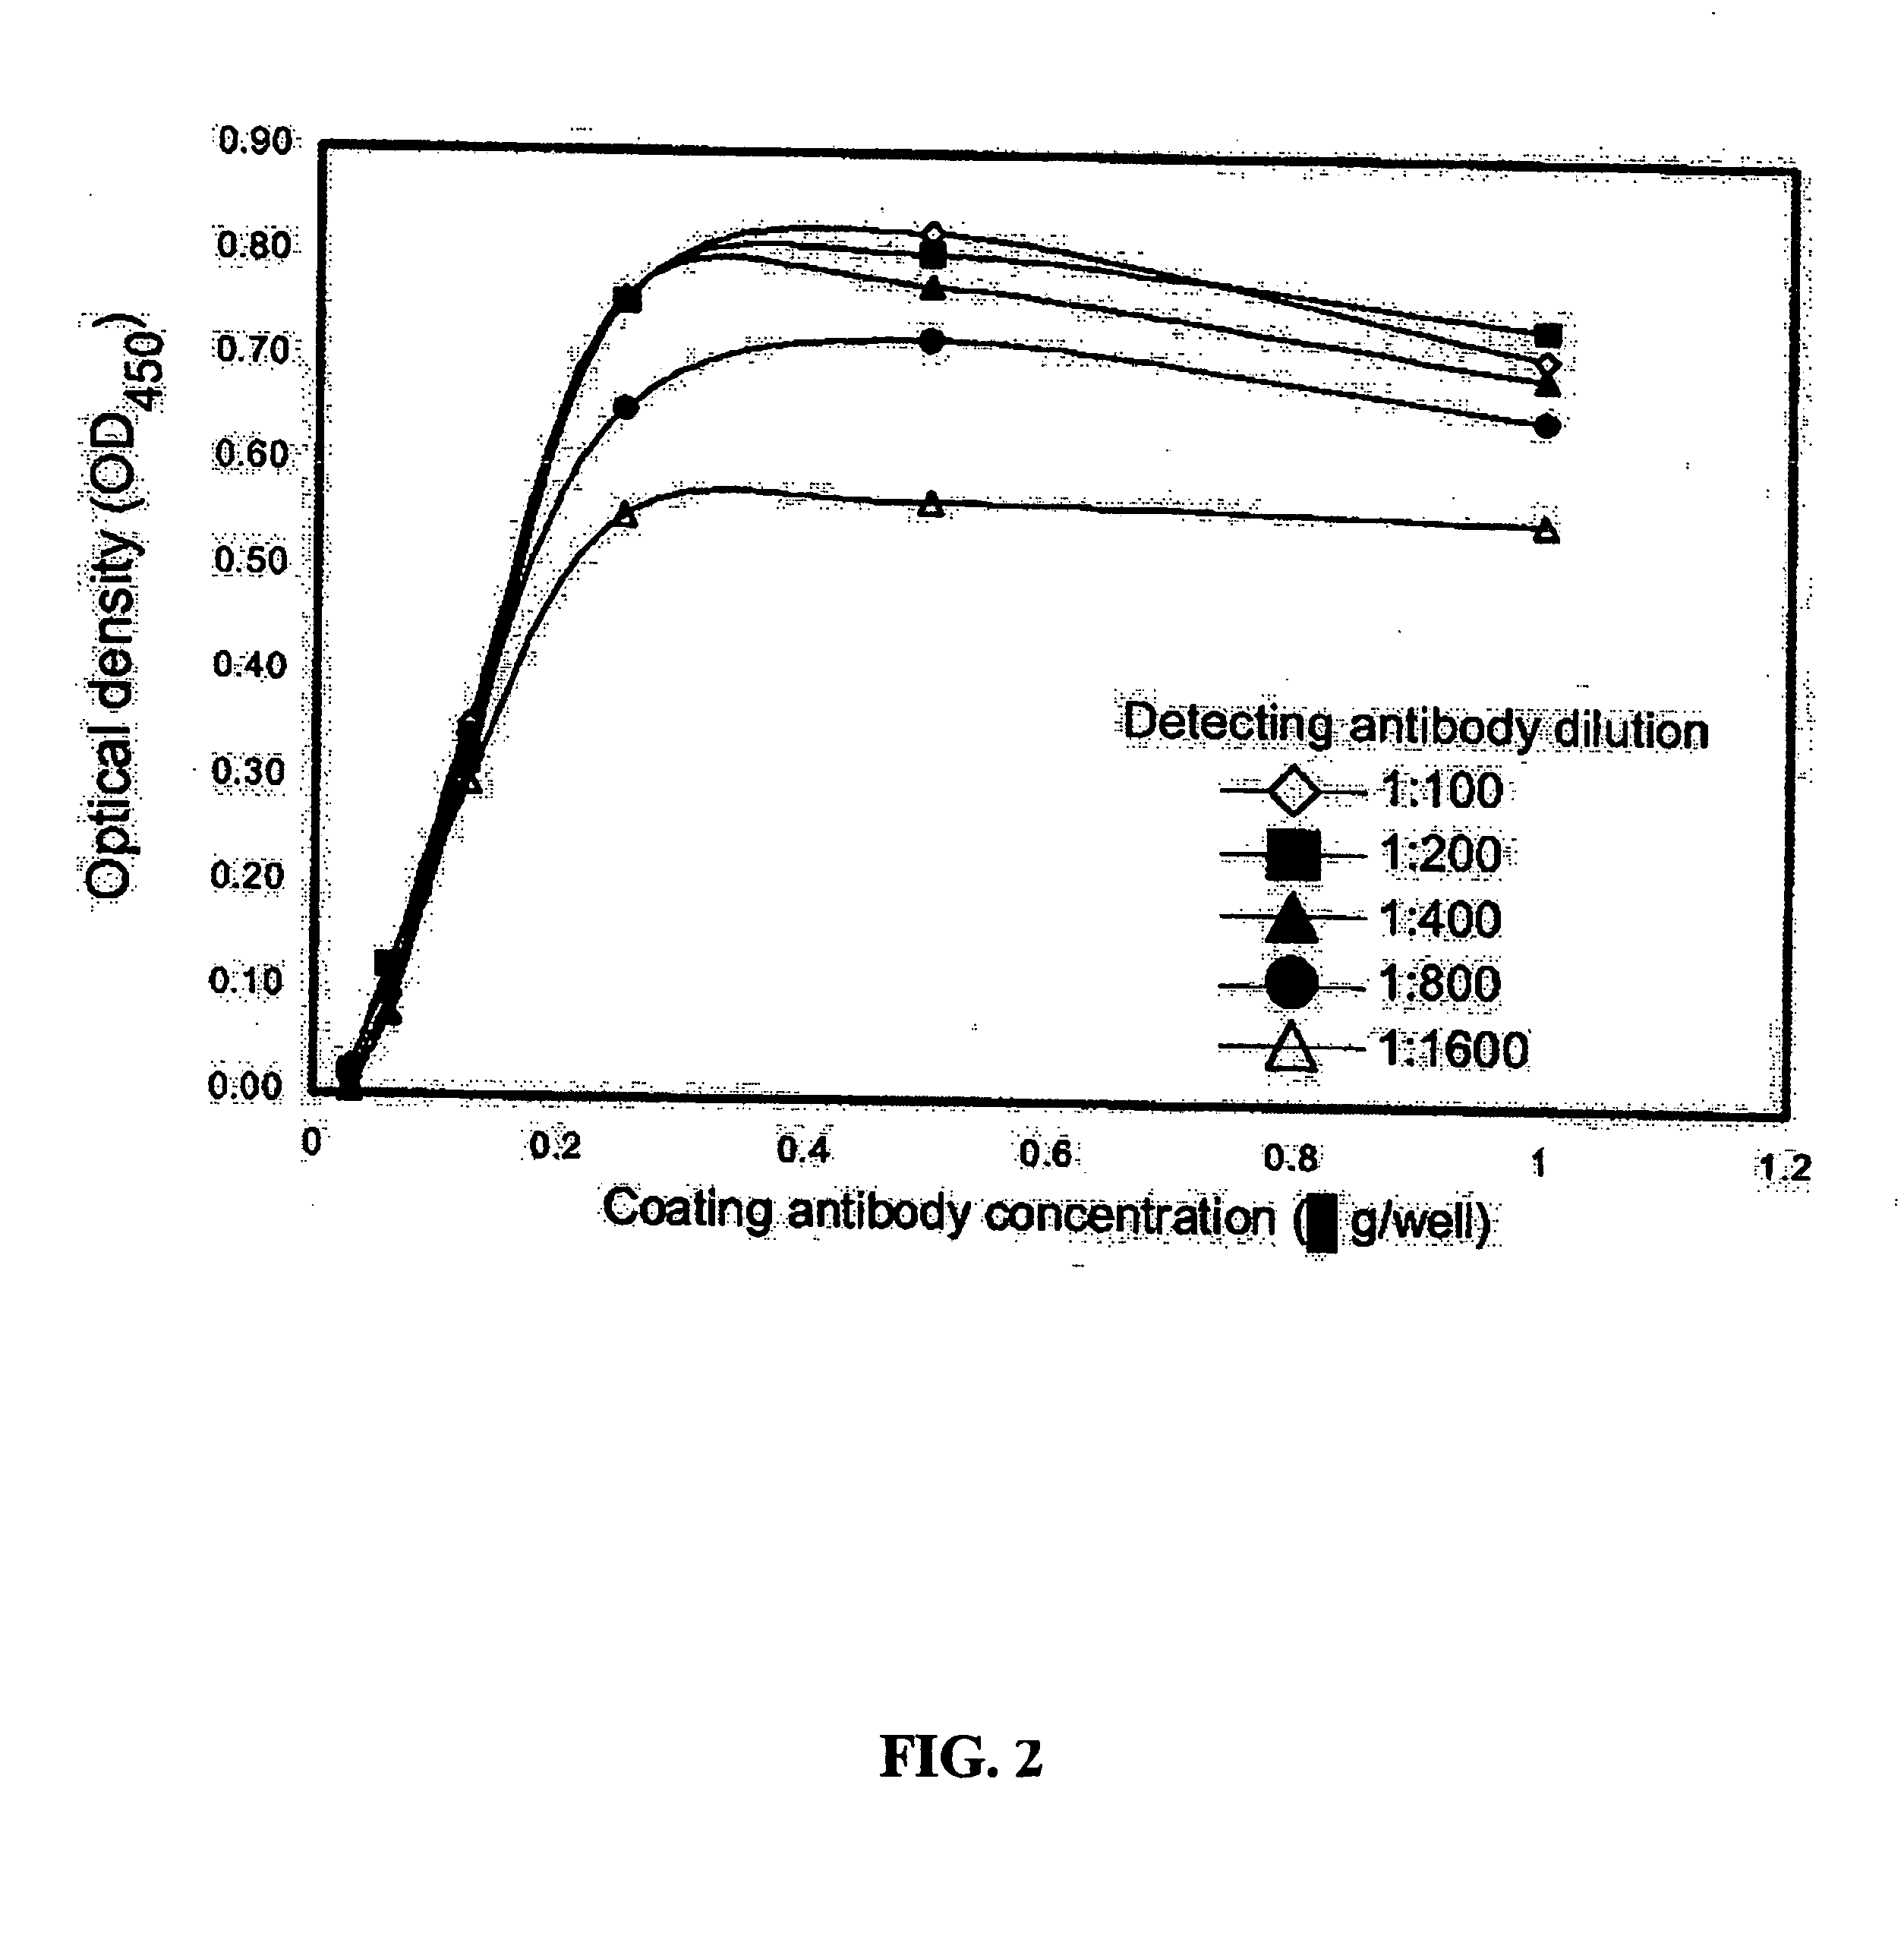 Methods and compositions for diagnosis and monitoring of prostate cancer progression by detection of serum caveolin